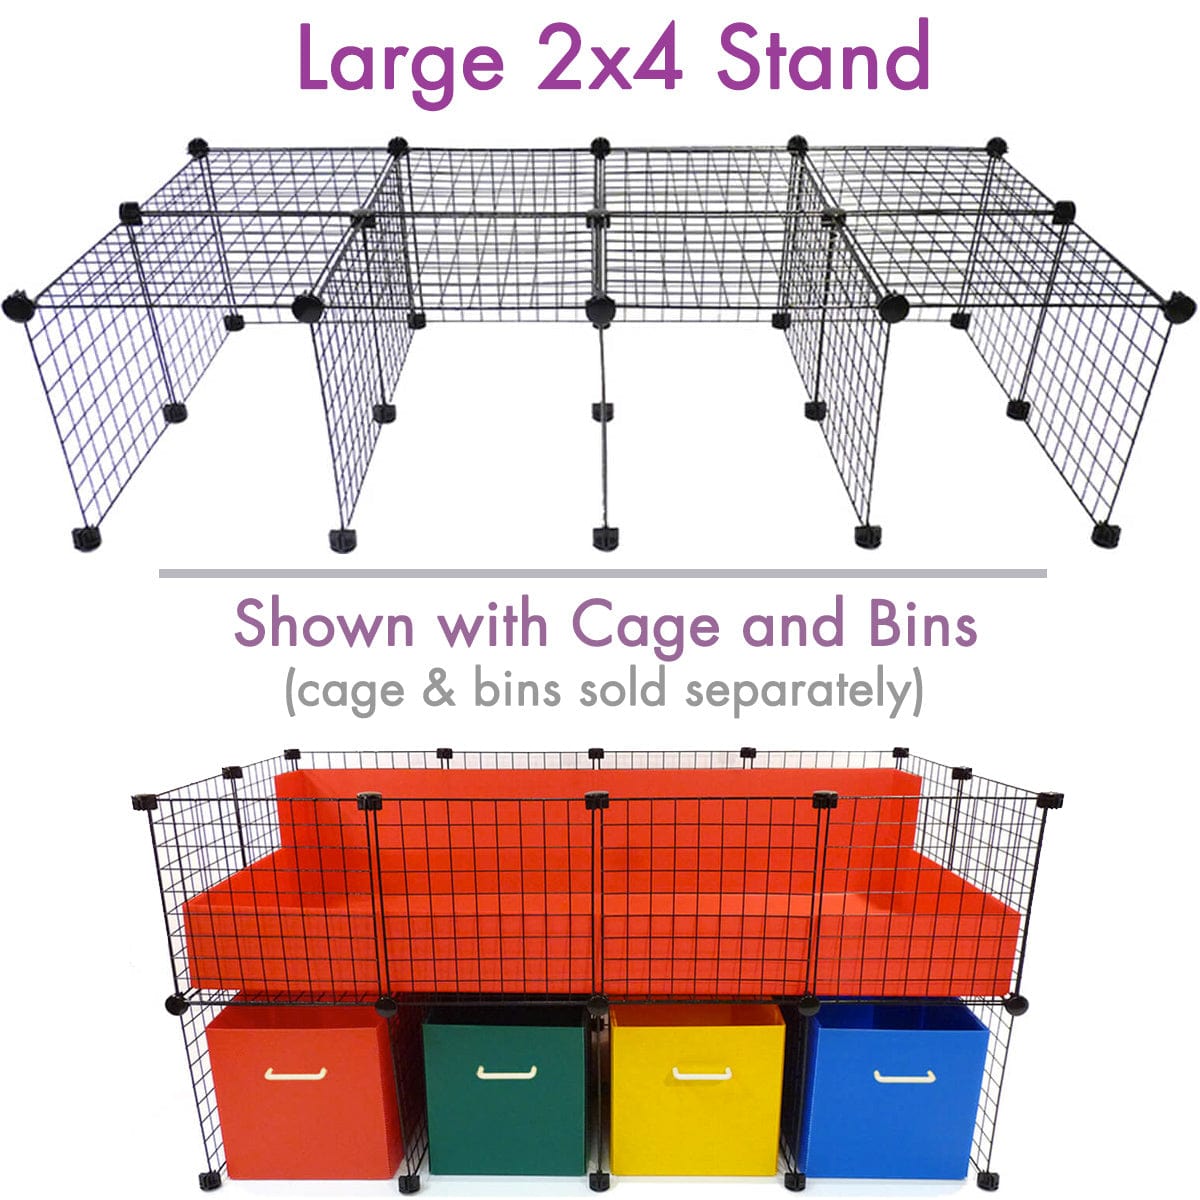 C&C guinea pig cage atop a stand with colorful storage bins